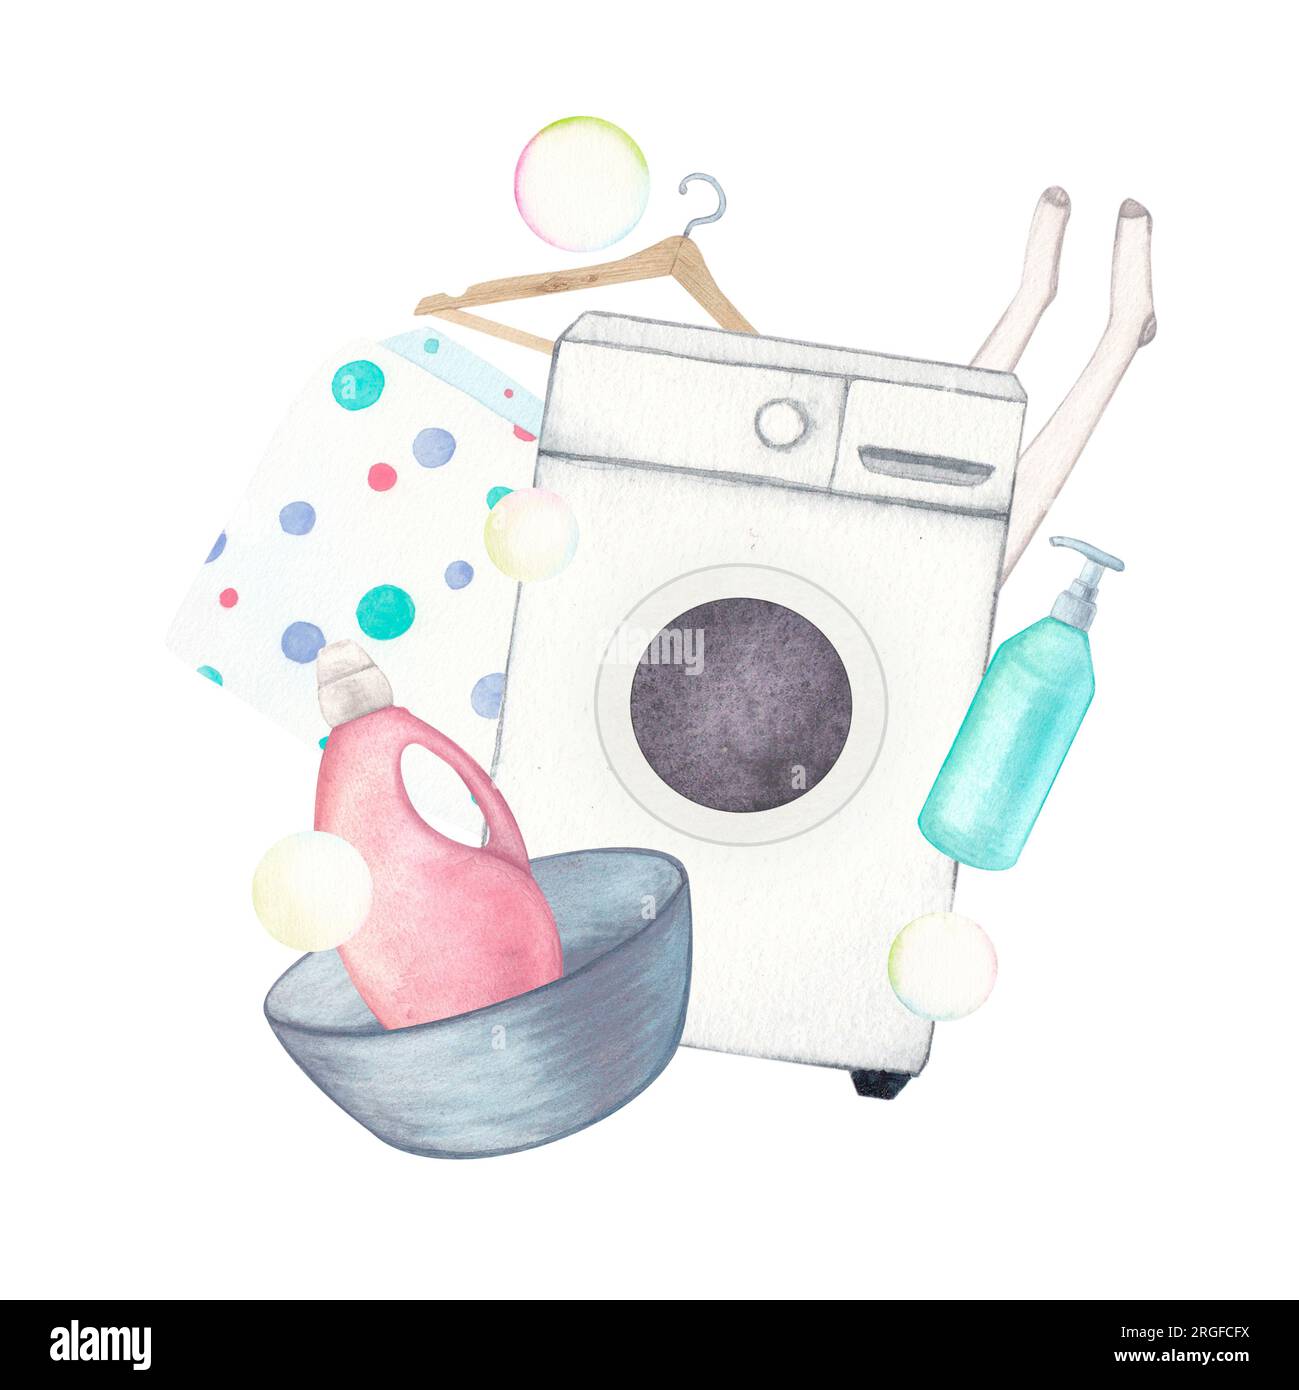 Laundry. Composition with washing machine, basin, washing gel, powder, soap, hanger and towel. Watercolor illustration on a white background. Hand-dra Stock Photo